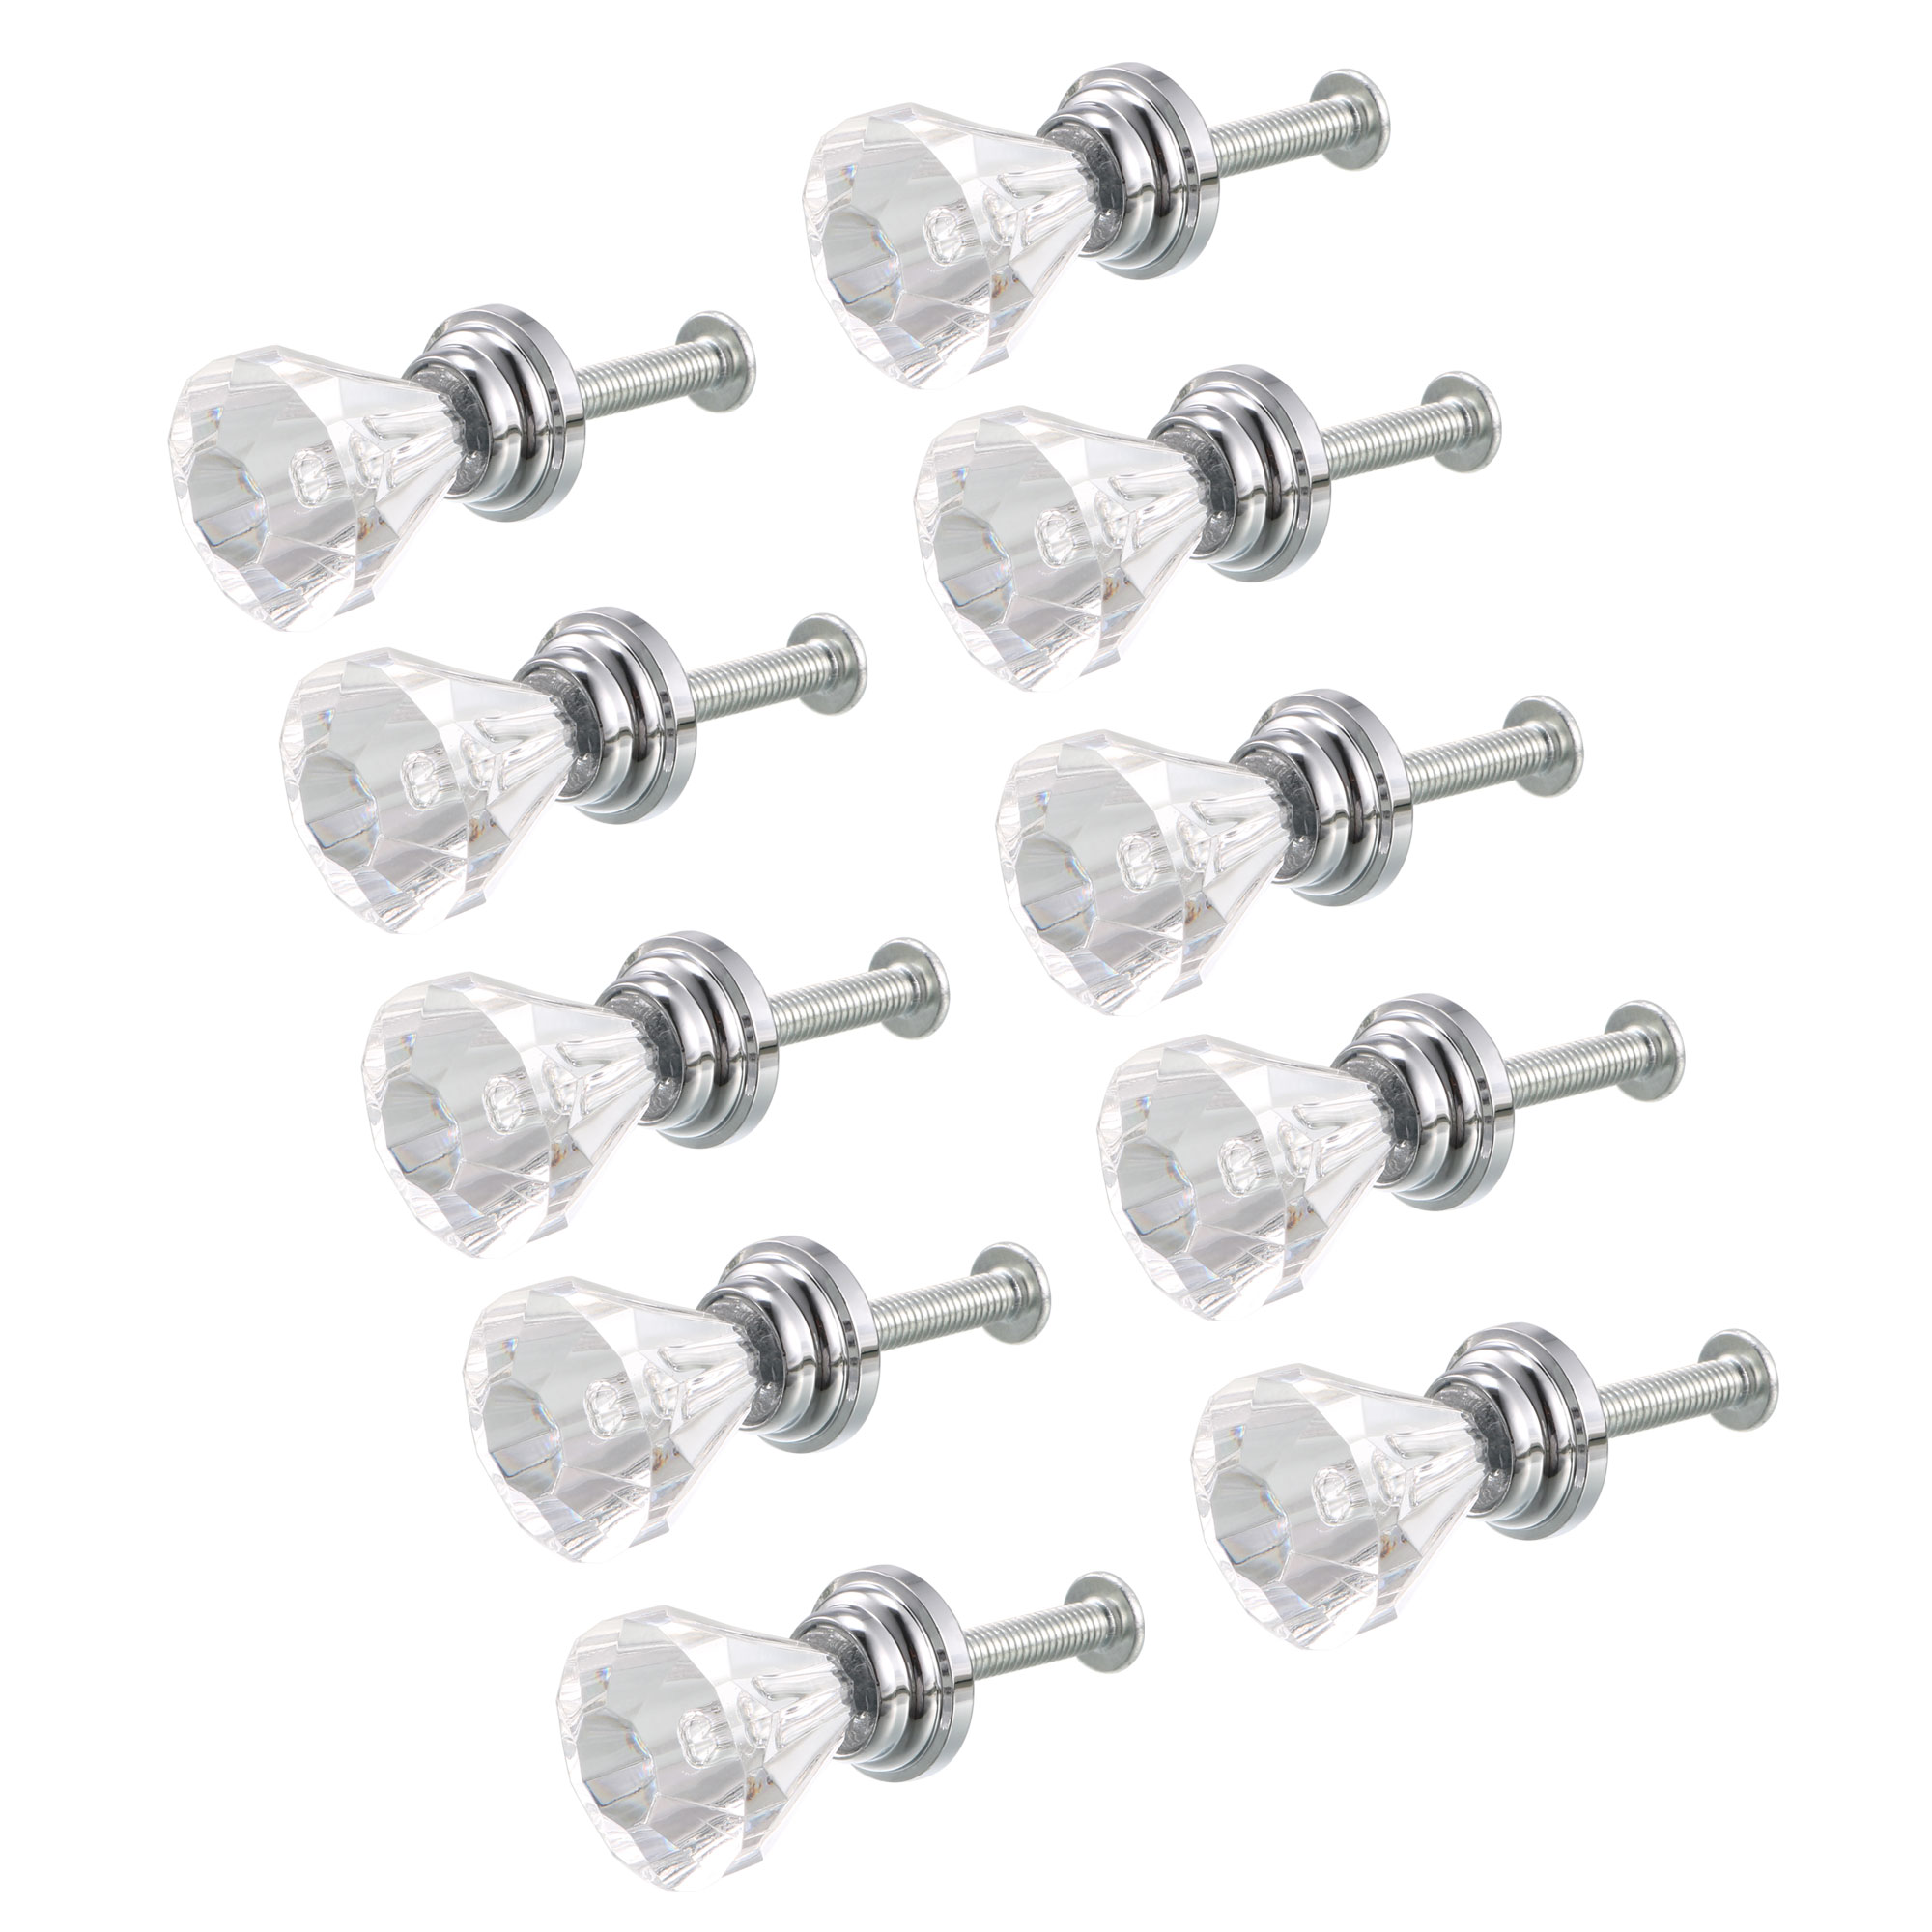 Uxcell Pull Knob, 0.79'' Dia Aluminum Alloy Acrylic Pulls Drawer Knobs Silver Tone 10 Pack - image 1 of 5